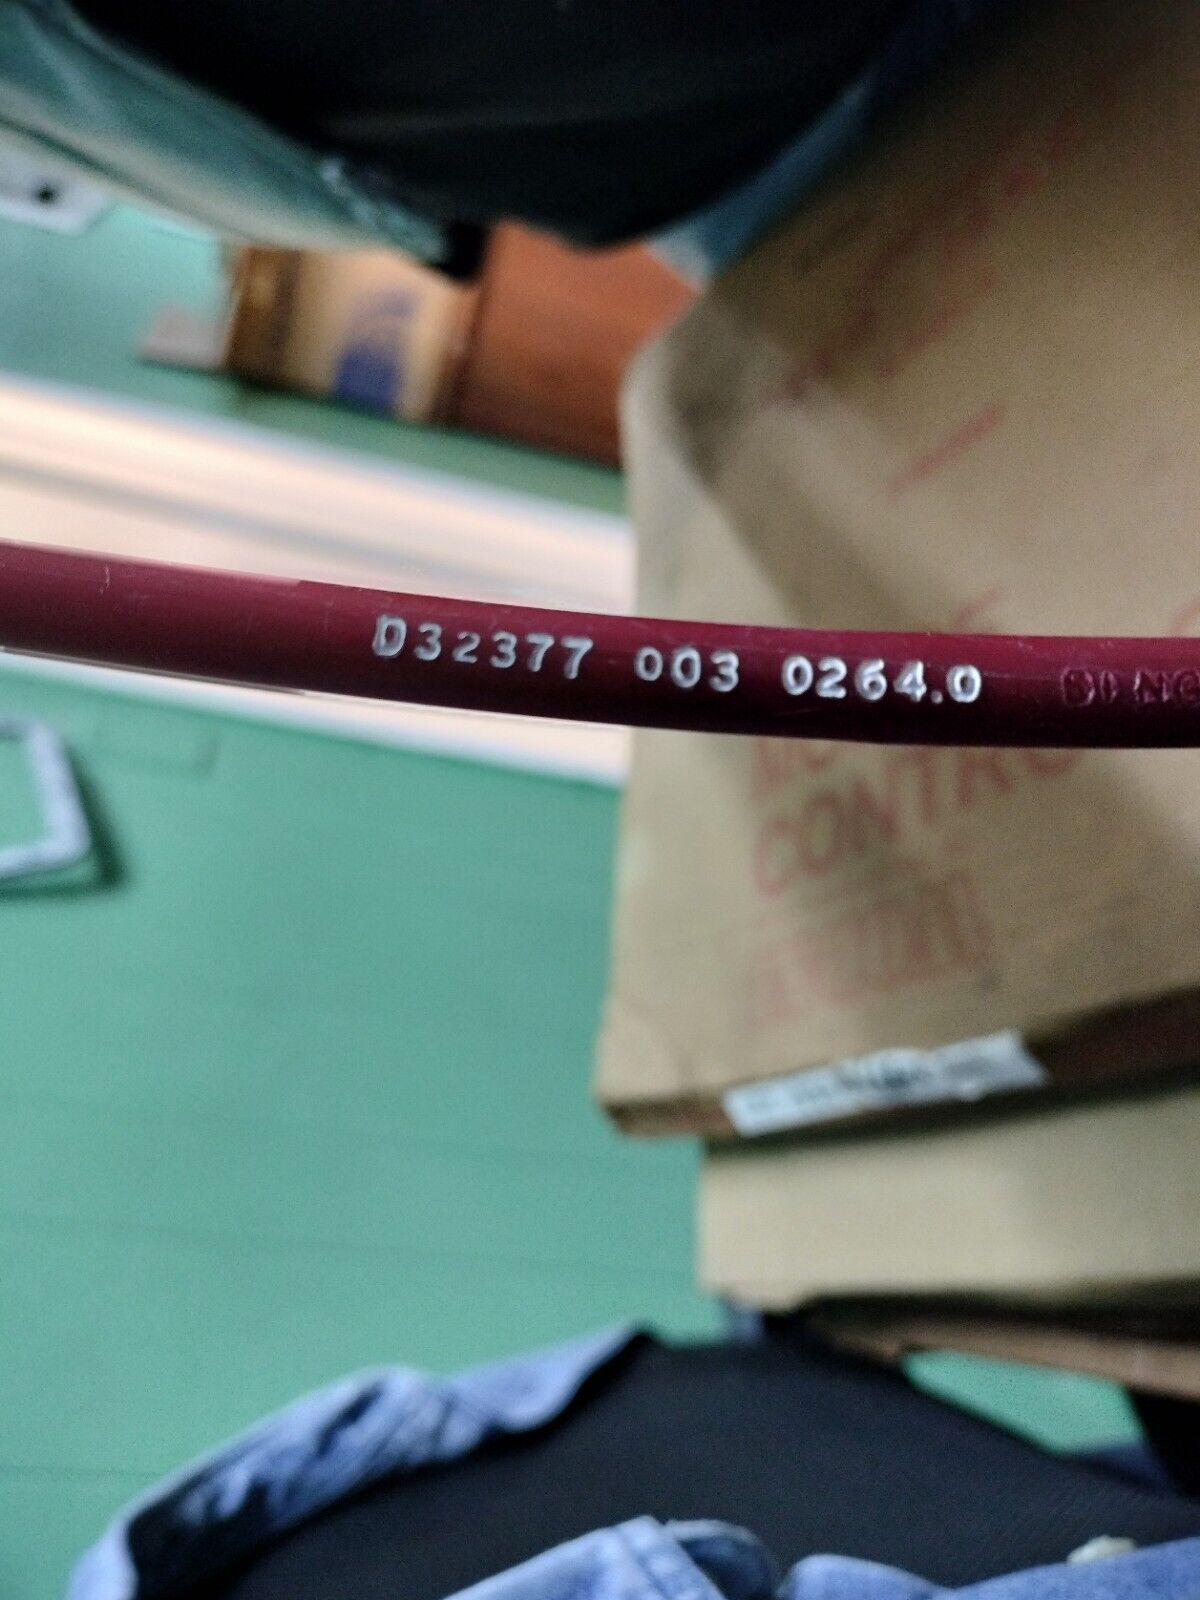 D32377-003 / MORSE RED JACKET CONTROL CABLE-  240  INCHES / 20 FT.  NEW IN BOX